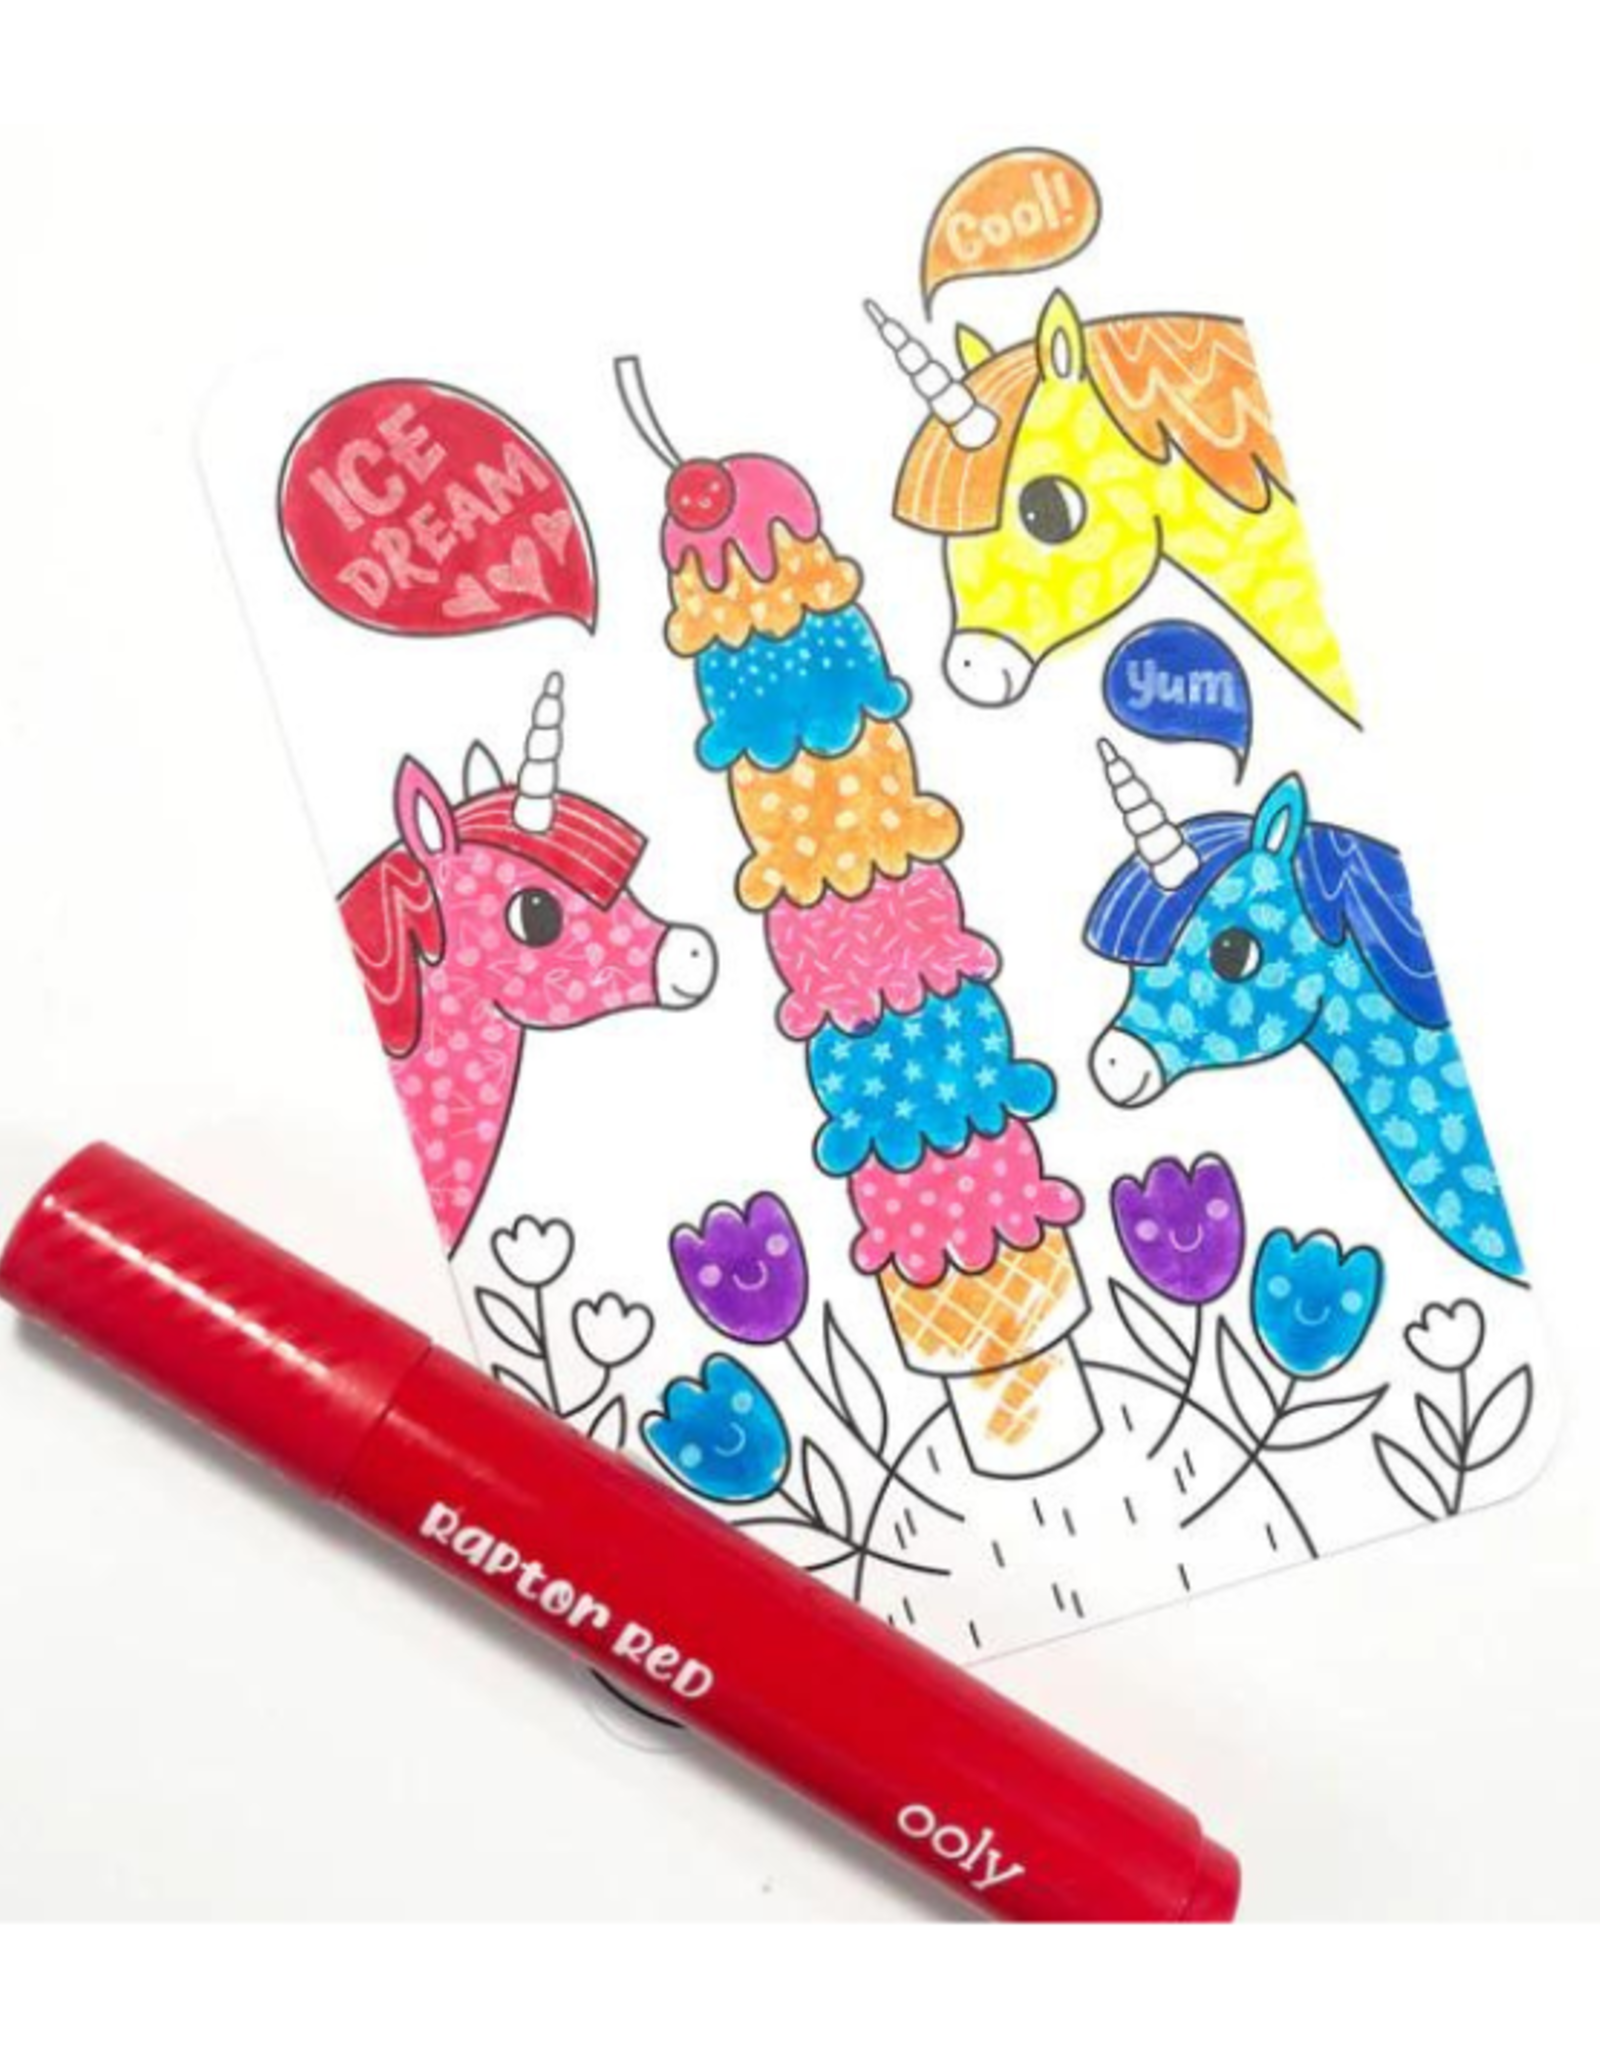 Ooly Ooly - Undercover Art Hidden Pattern Coloring Activity - Unicorn Friends